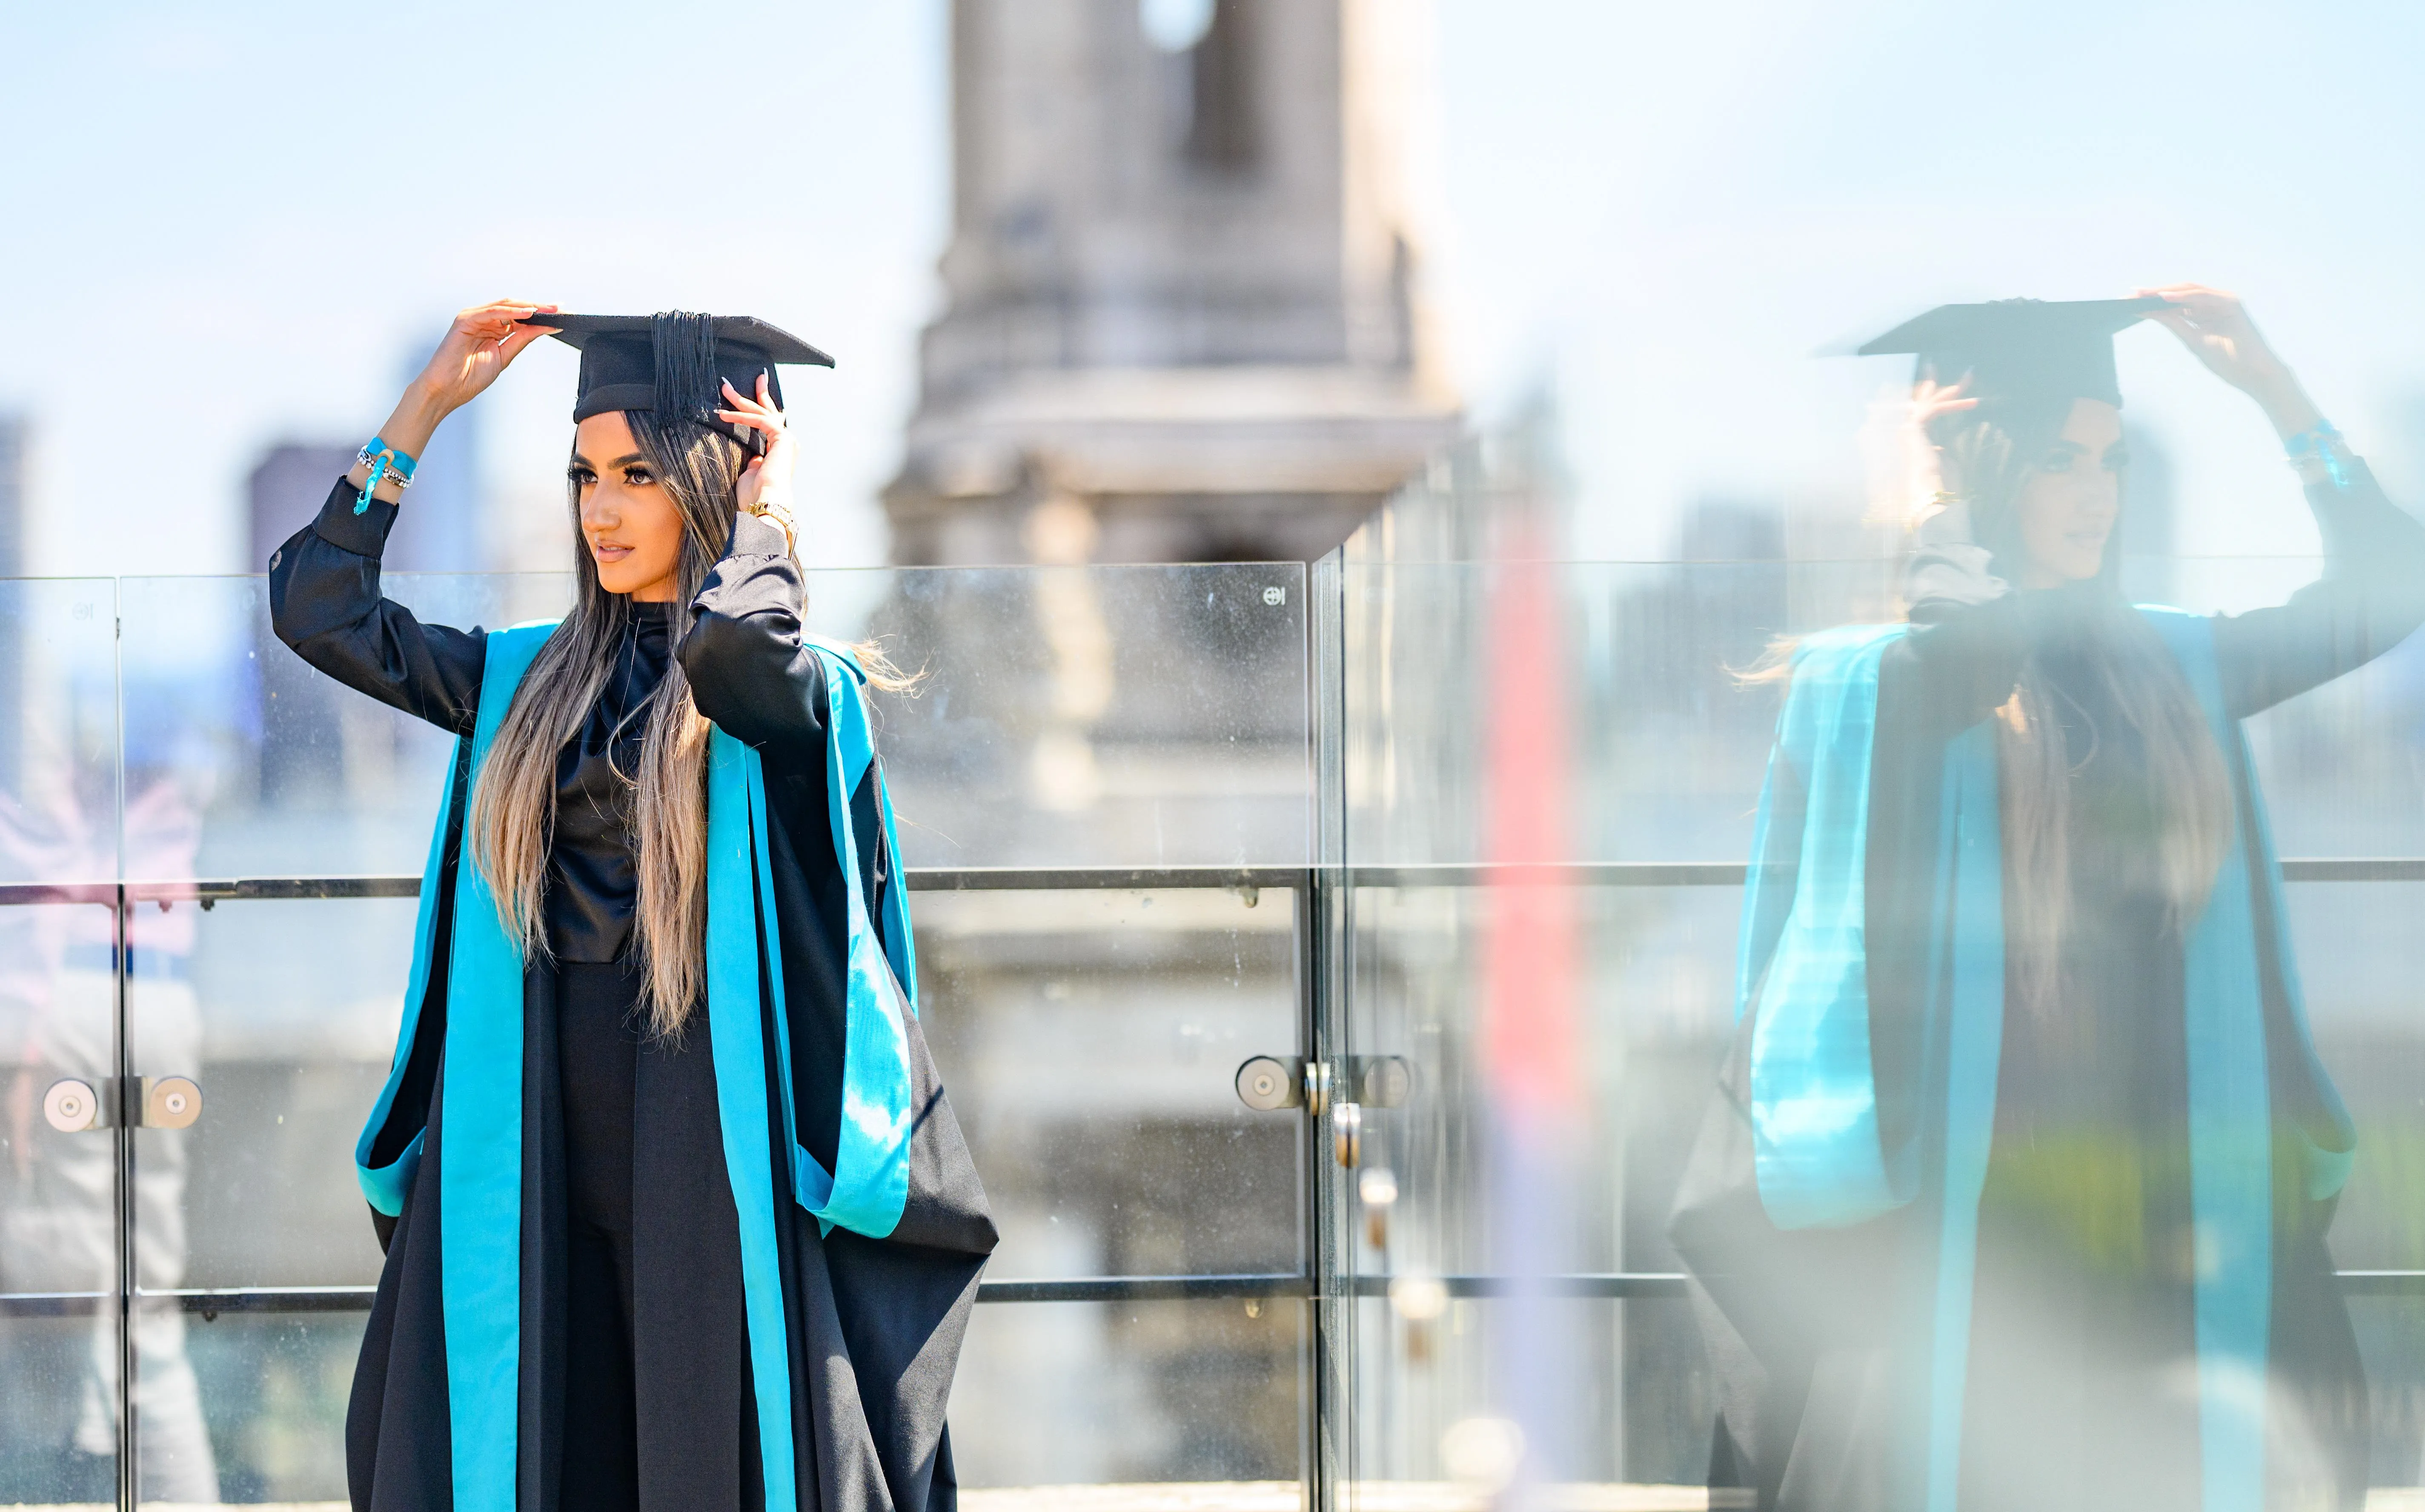 A King's Business School graduate wearing academic dress adjusts her mortar board. Her image is reflected in the glass railing to her side, and we can see the London skyline behind her.